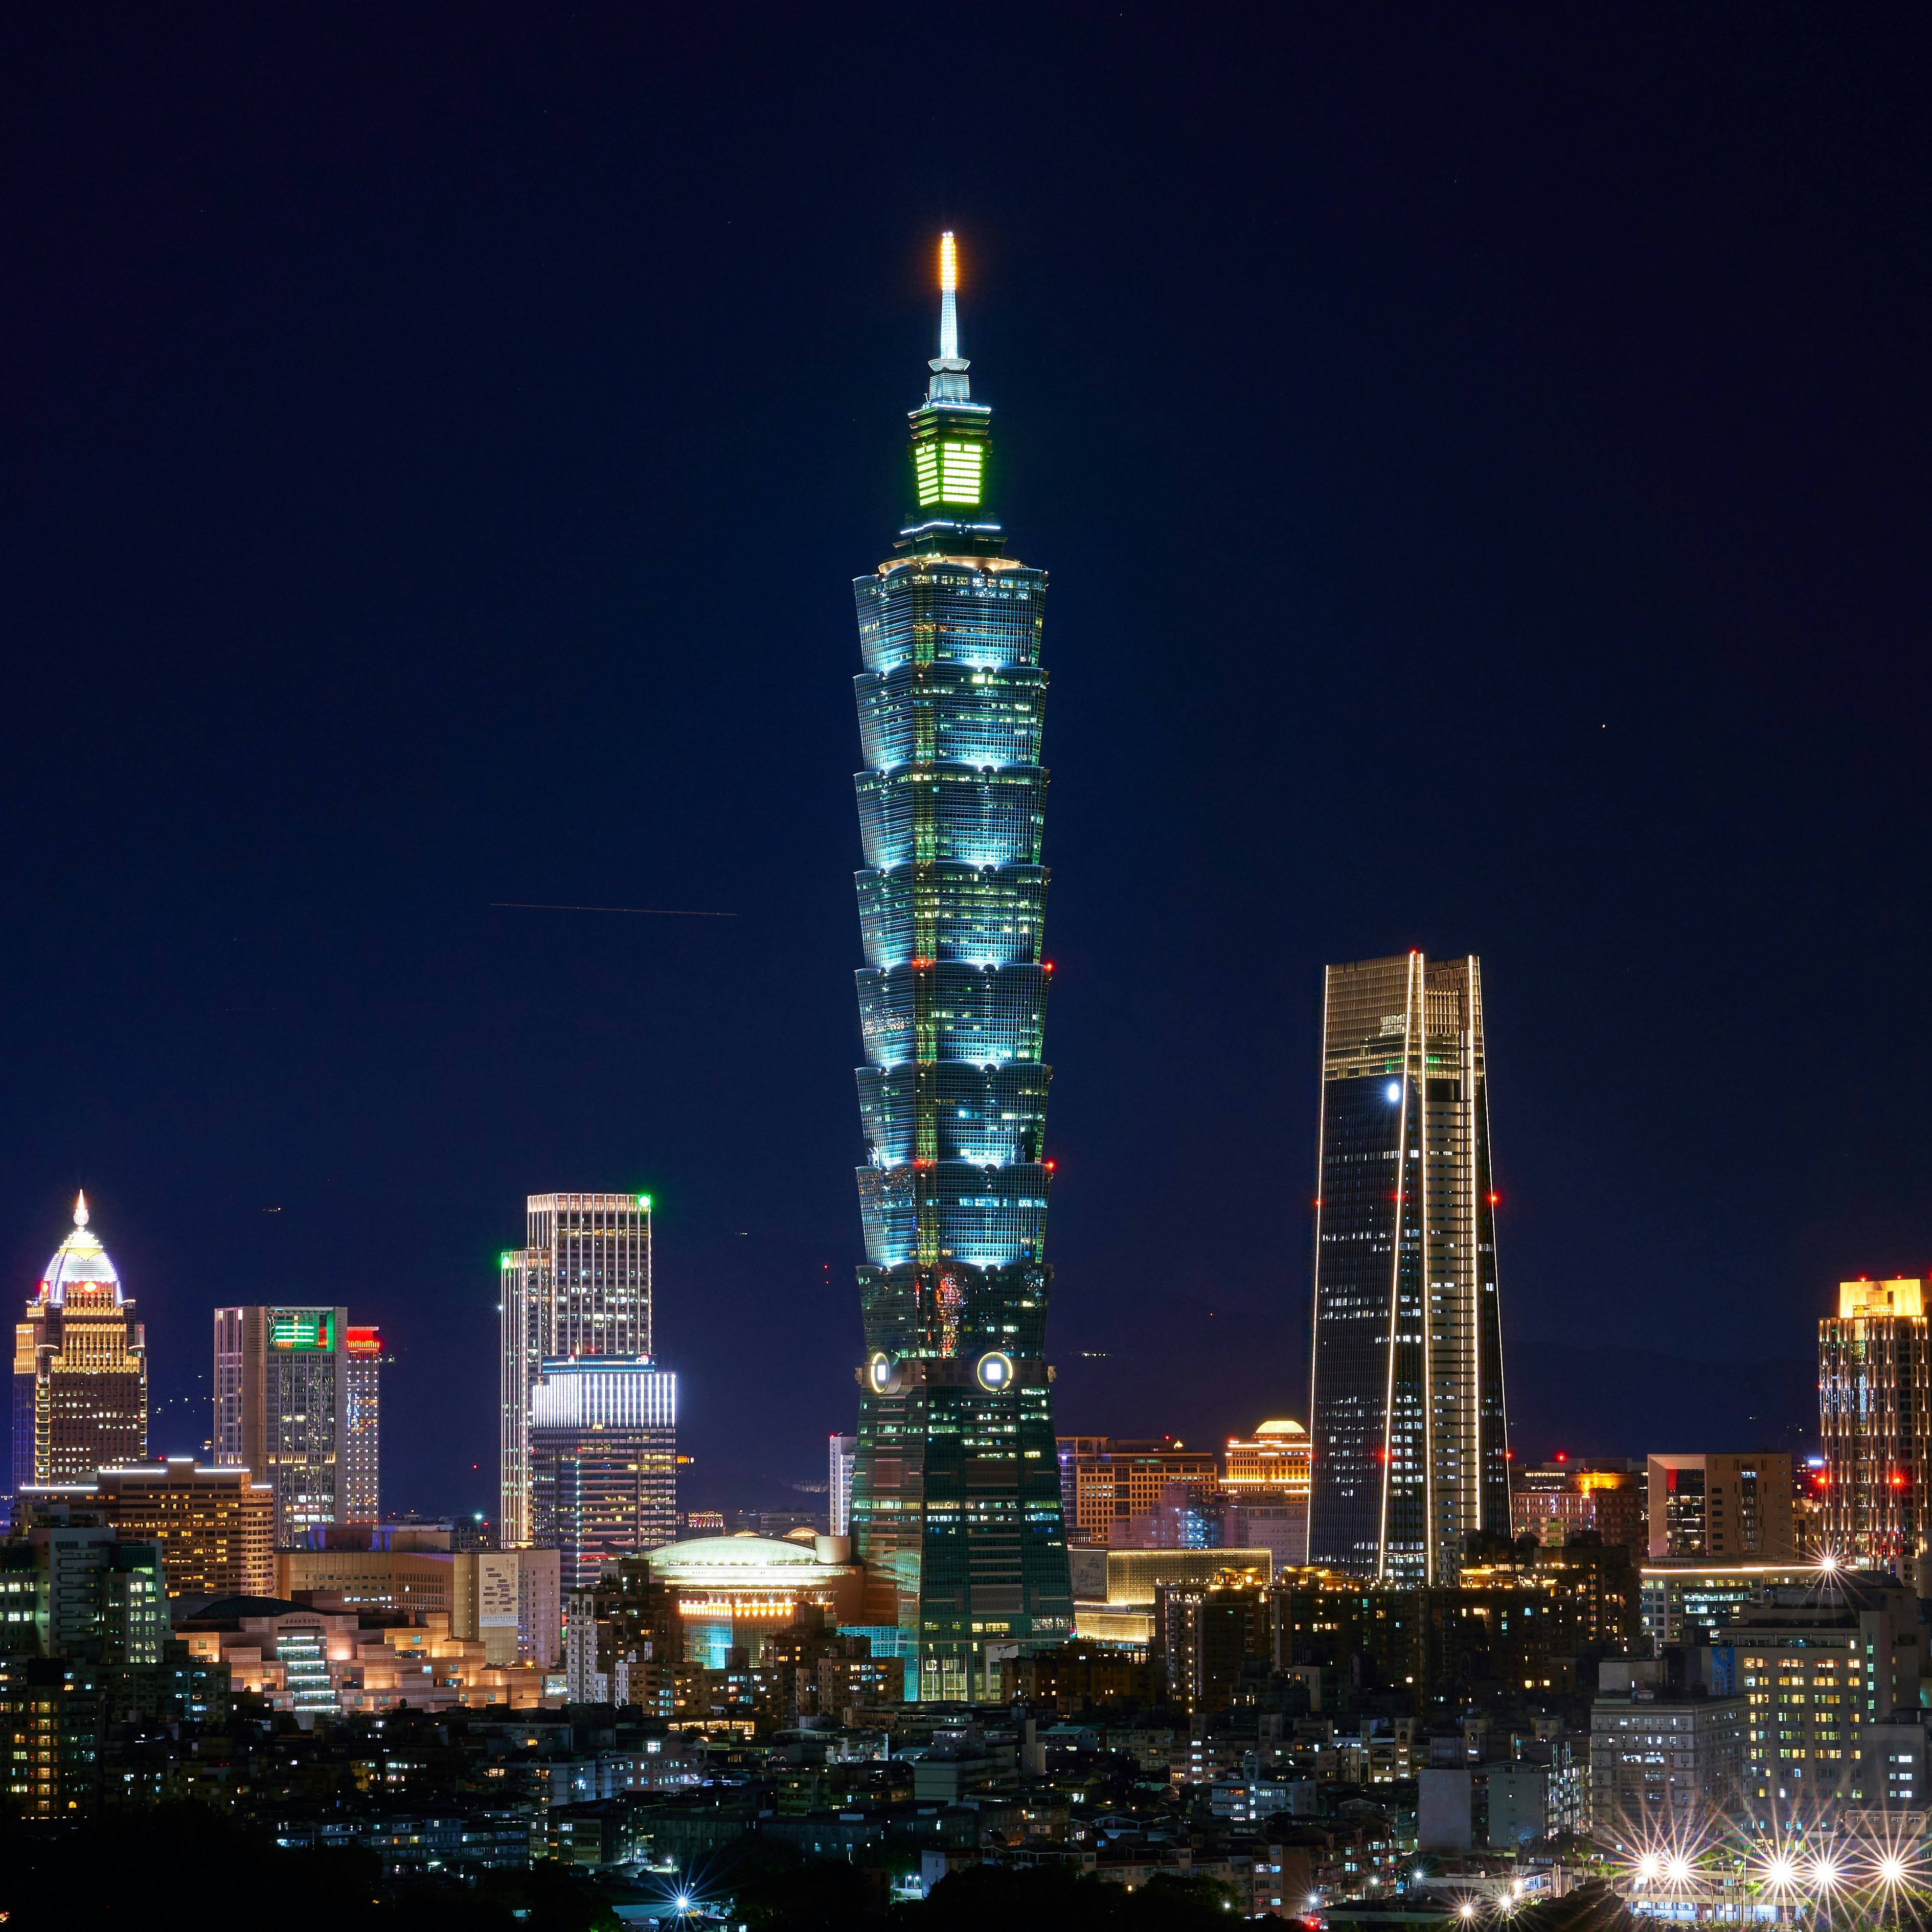 Taiwan: the home of AI and much more